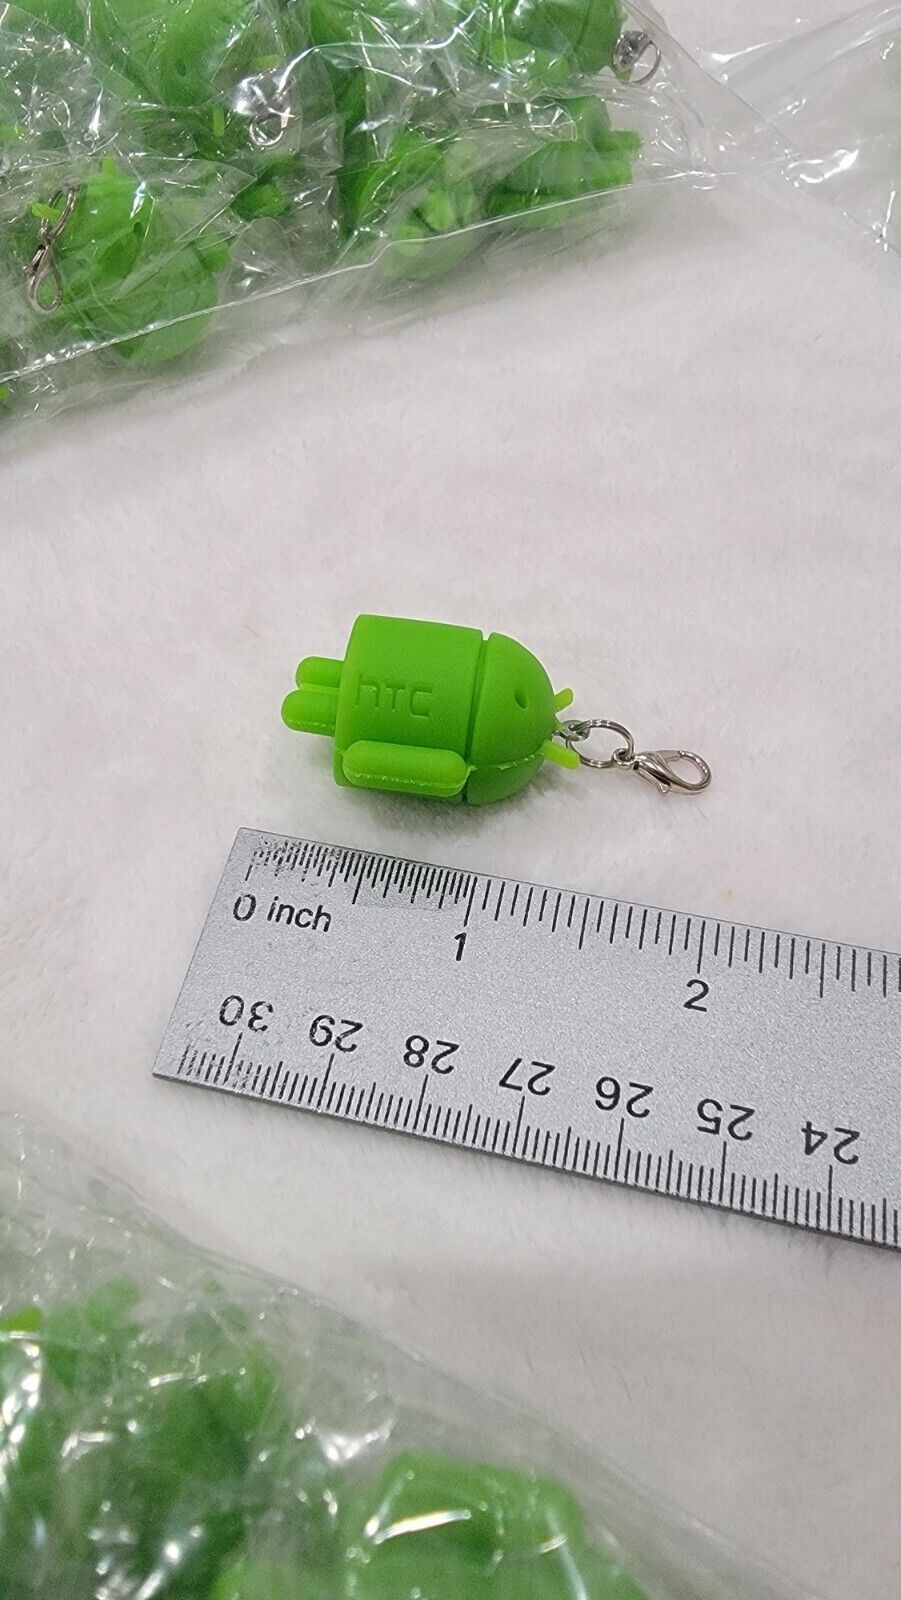 New Lot Of 1000 Rubber Robot Google Android Key Chain Charm Mini Doll Green HTC